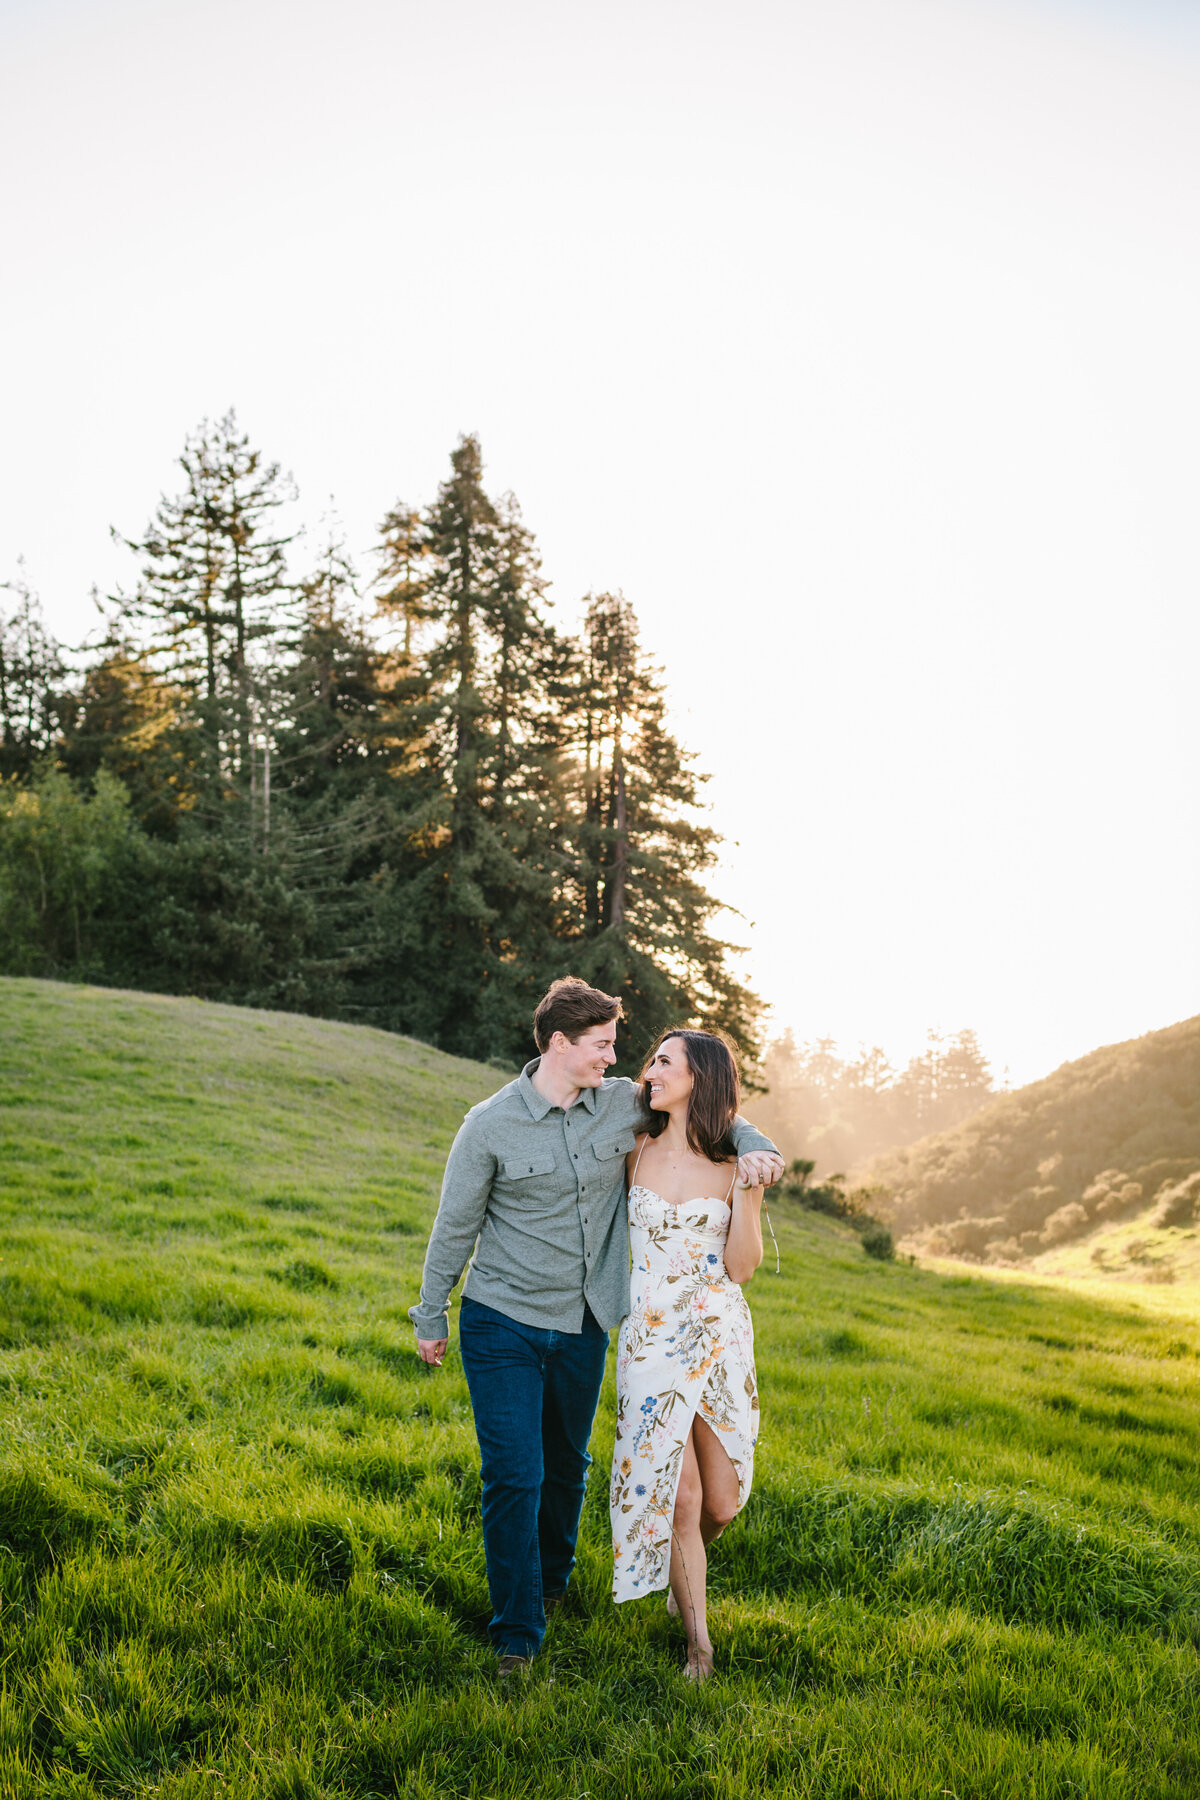 Best California and Texas Engagement Photos-Jodee Friday & Co-326